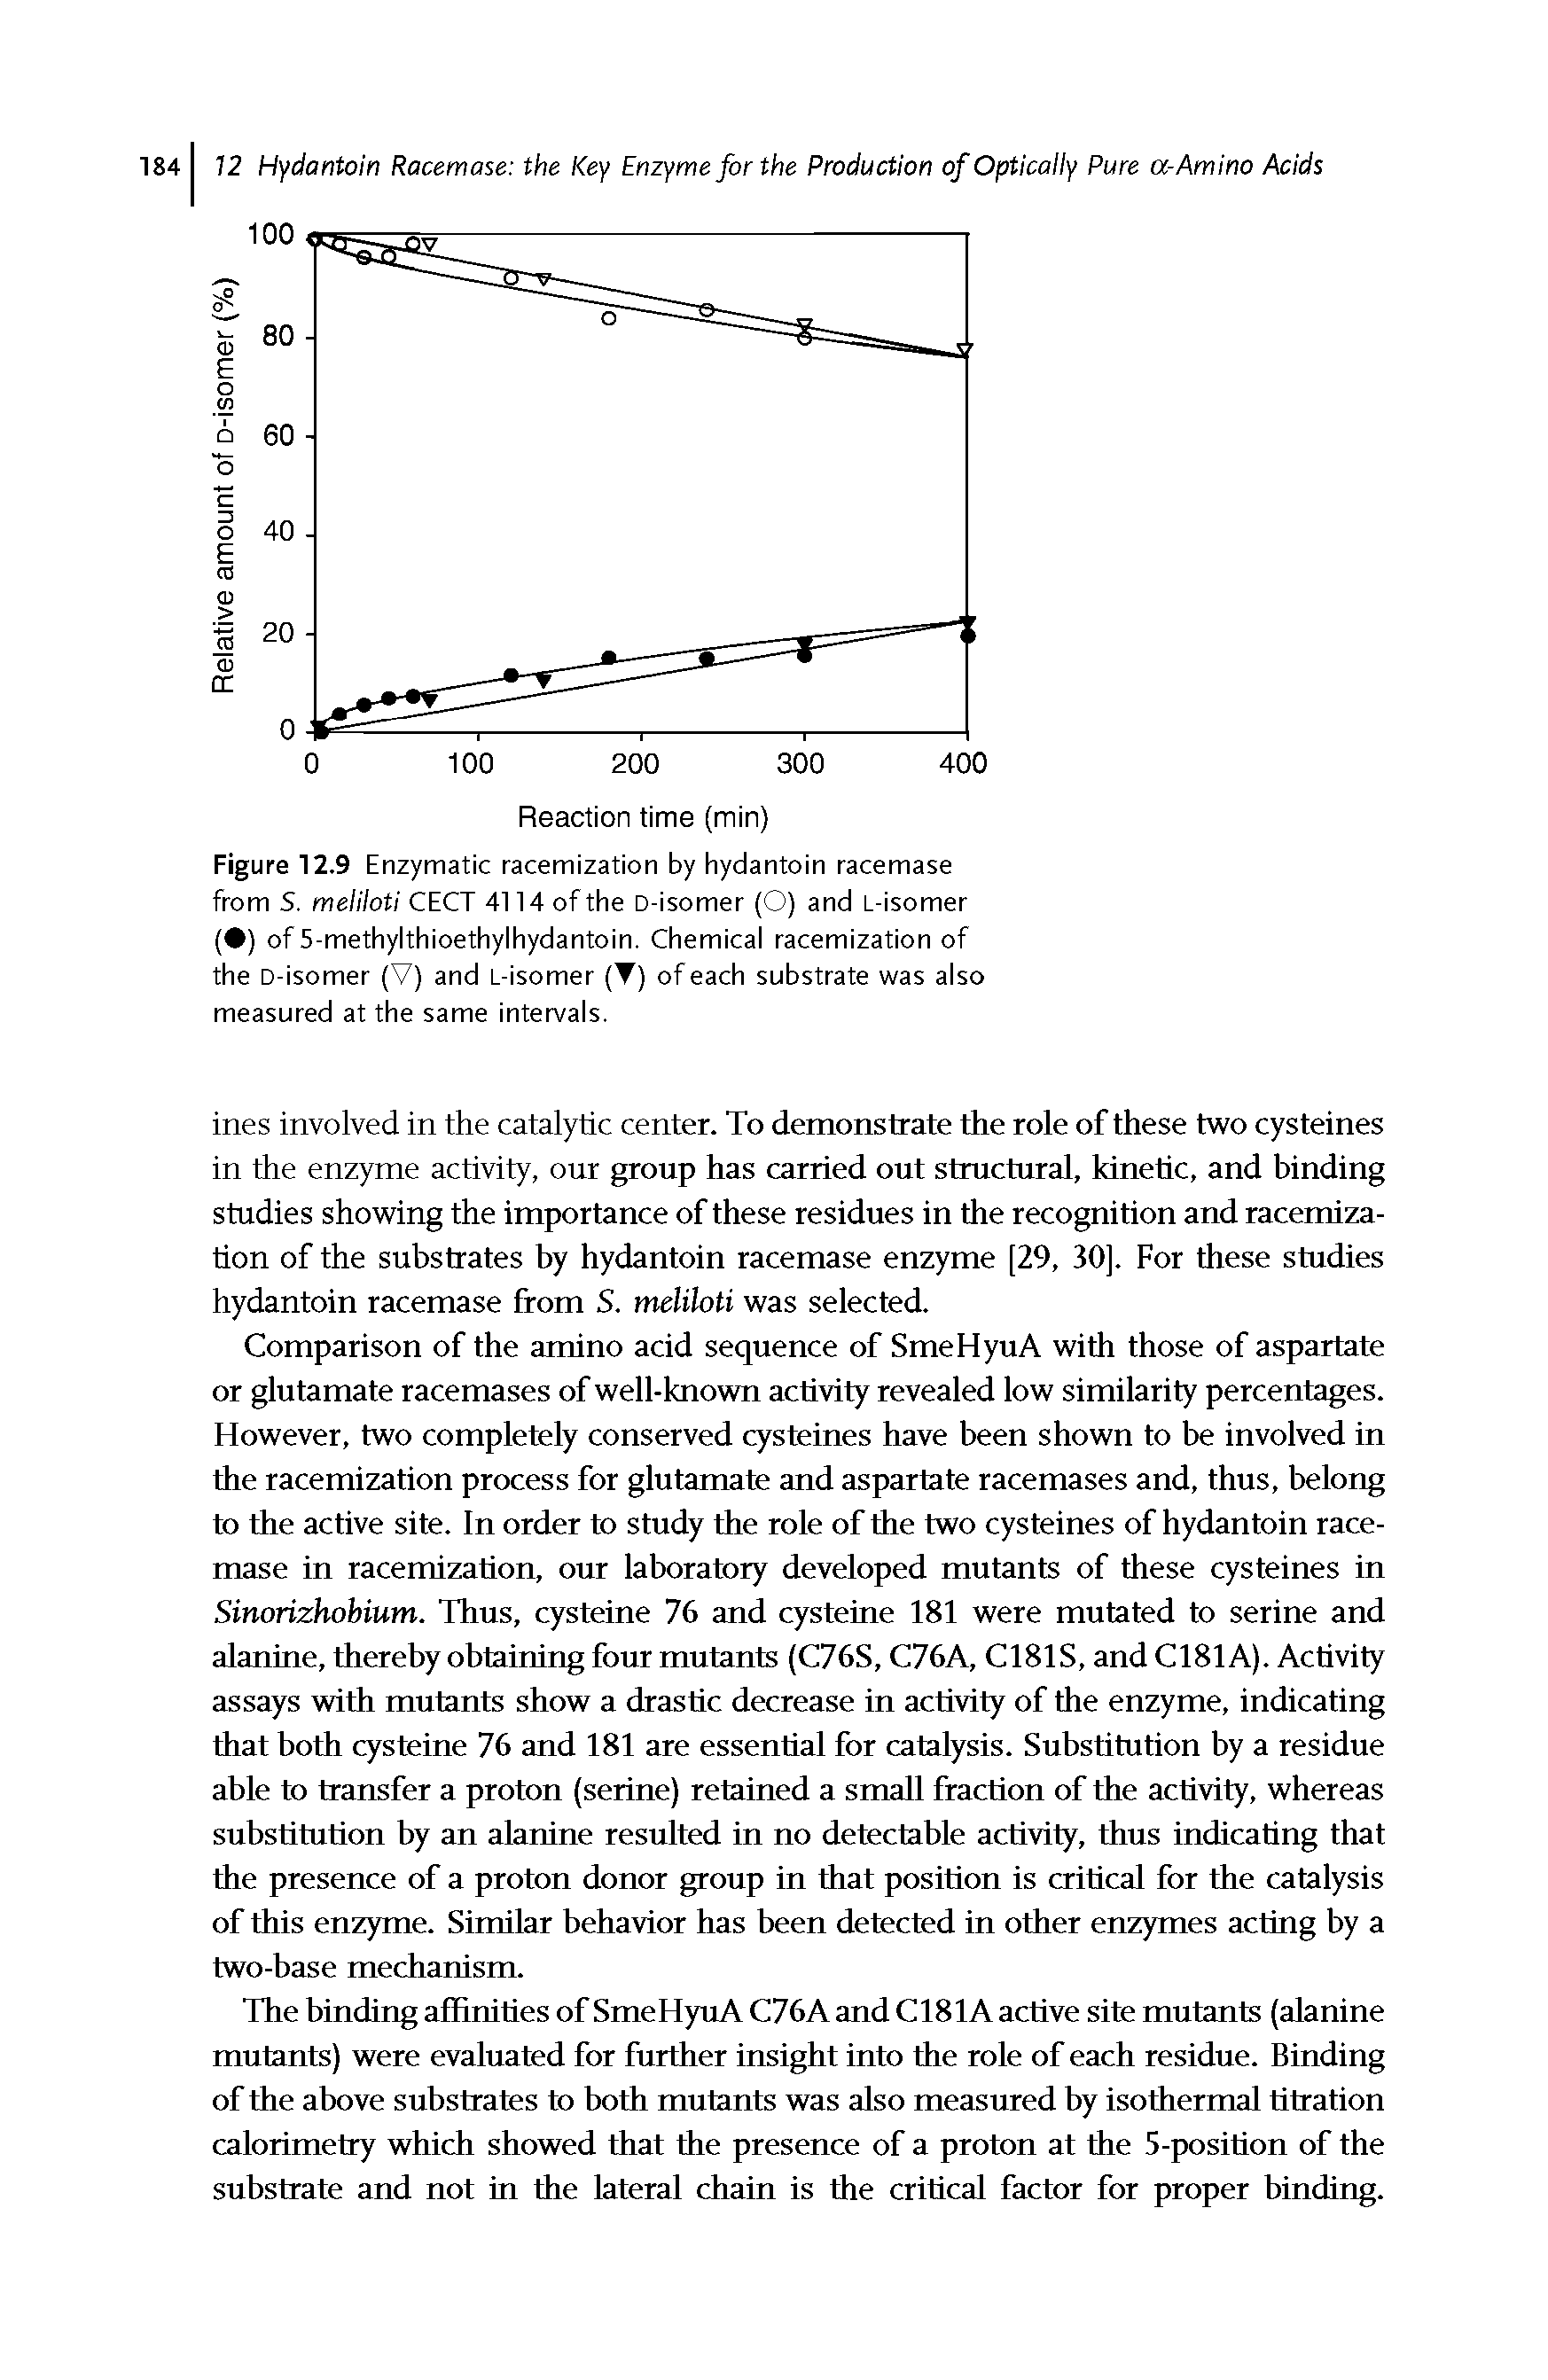 Figure 12.9 Enzymatic racemization by hydantoin racemase from S. meiiioti CECT 4114 of the D-isomer (O) and L-isomer ( ) of 5-methylthioethylhydantoin. Chemical racemization of the D-isomer (V) and L-isomer (T) of each substrate was also measured at the same intervals.